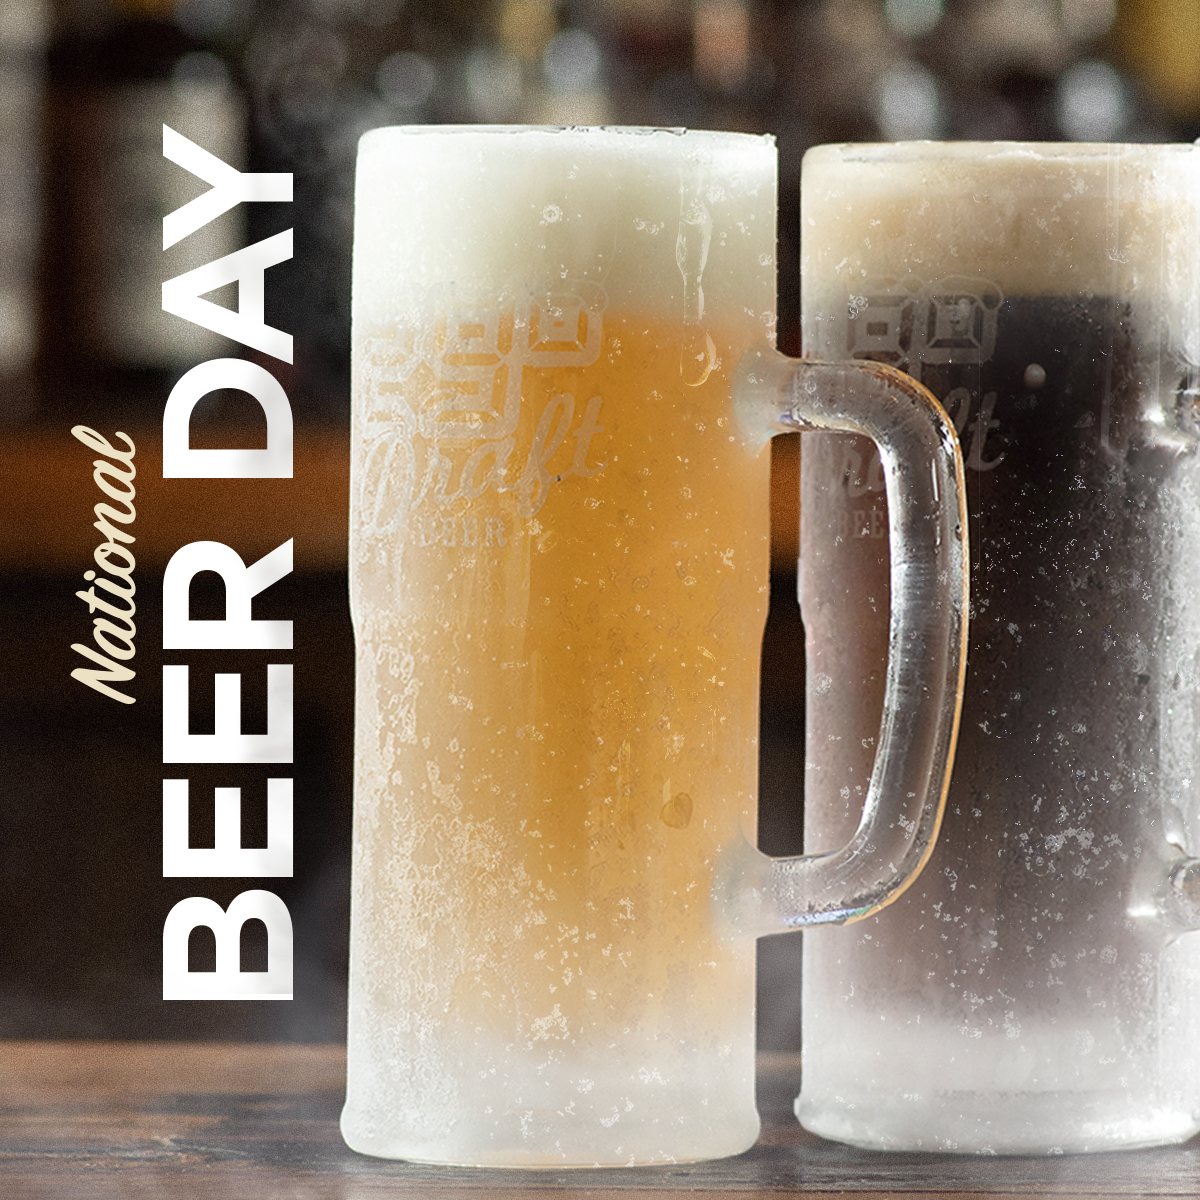 How could you not celebrate National Beer Day with the coldest beer in the game? Call up the crew and head to the Peaks for your favorite 29° drafts beers, frosty 22 oz mugs, and scenic views. #twinpeaksrestaurants #twinpeaksgirls #bestviewsinthegame #nationalbeerday #beer